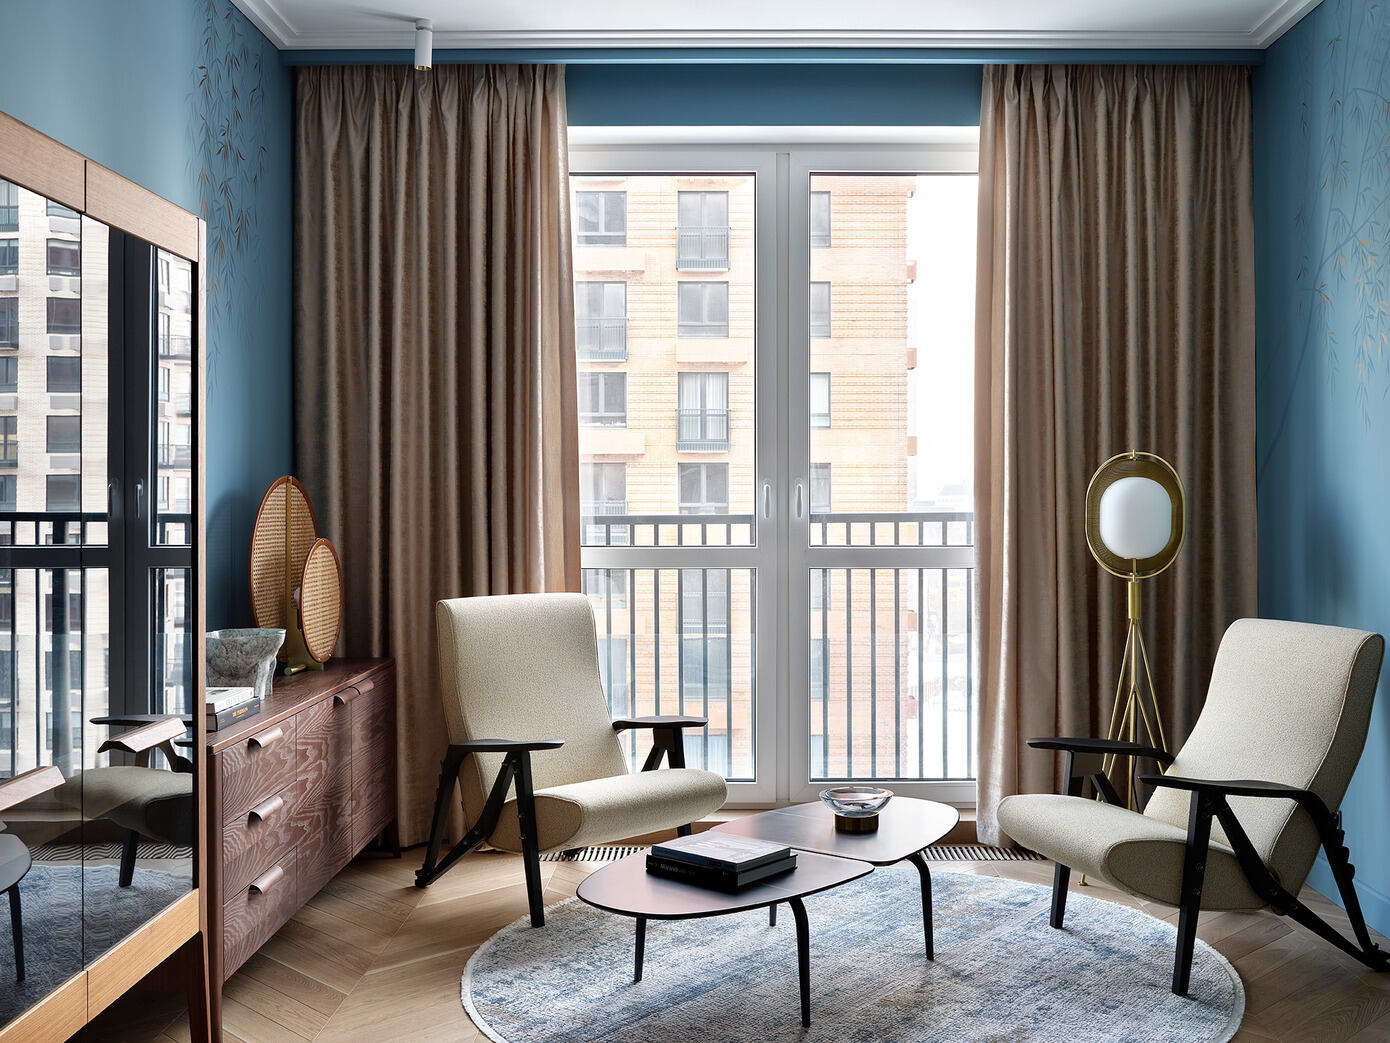 Apartment with Blue Accents: A Retro Revival in Moscow